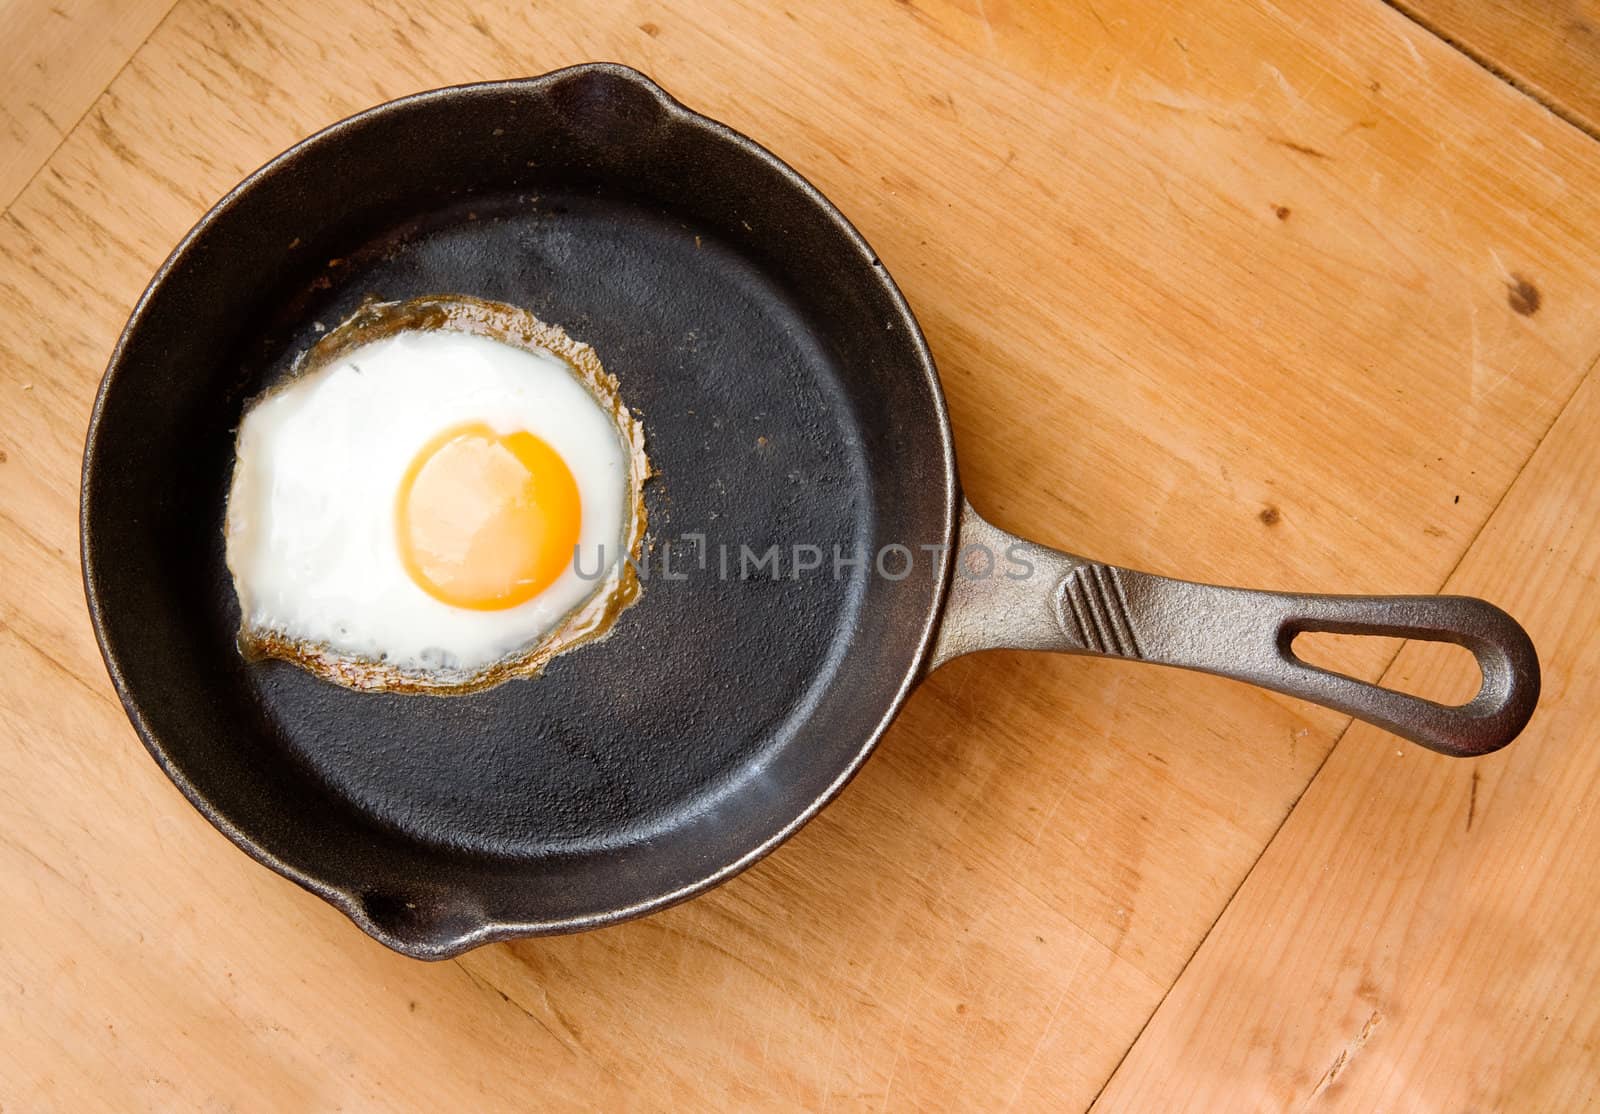 Detail image of a fried egg on a cast iron frying pan viewed from above